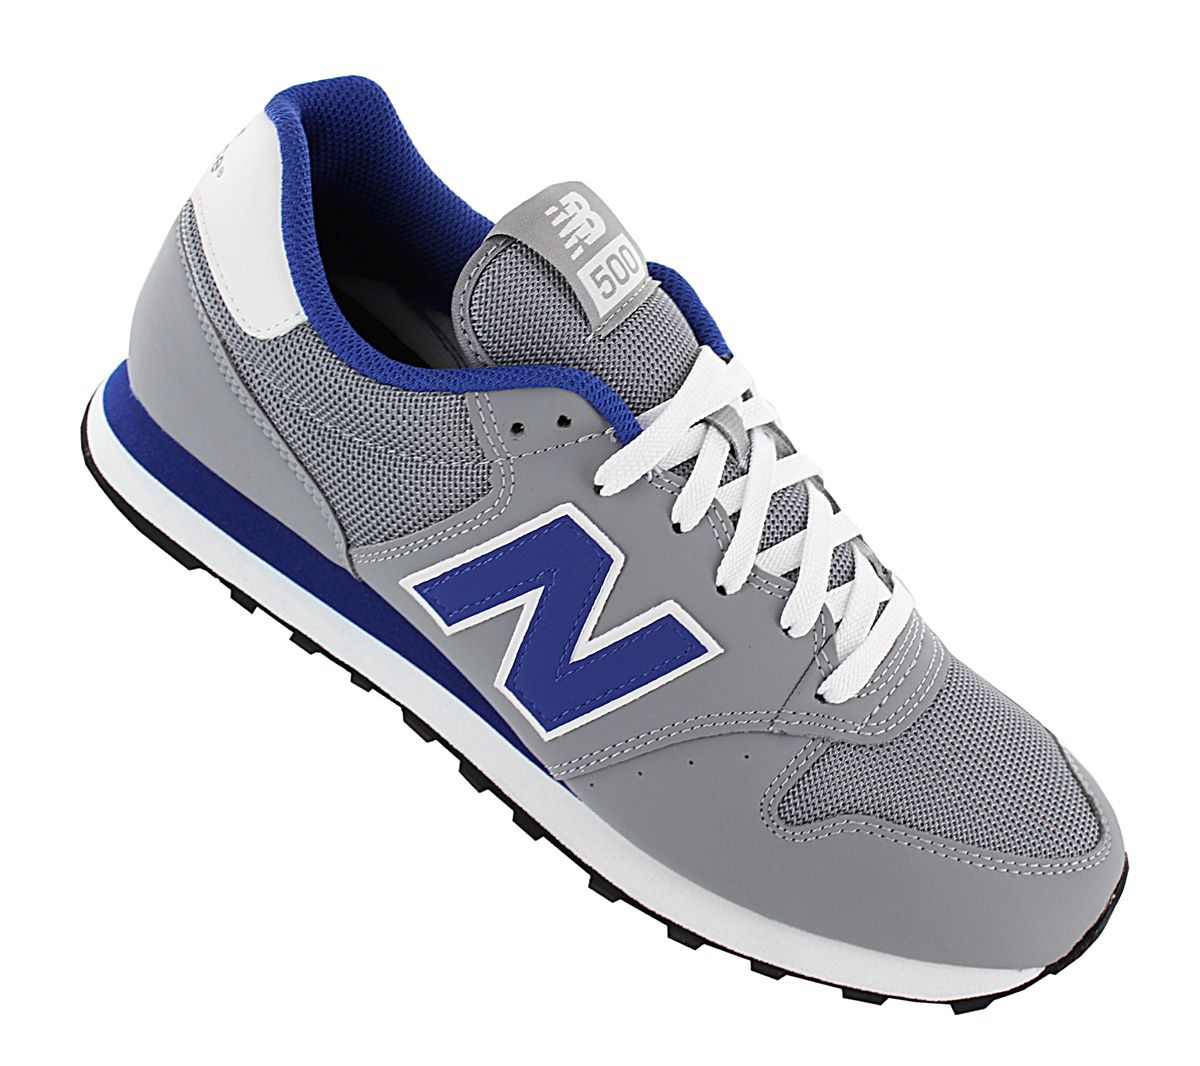 New Balance Lifestyle GM500 GM500TRS Men's Sneaker Leisure Sports Shoes ...